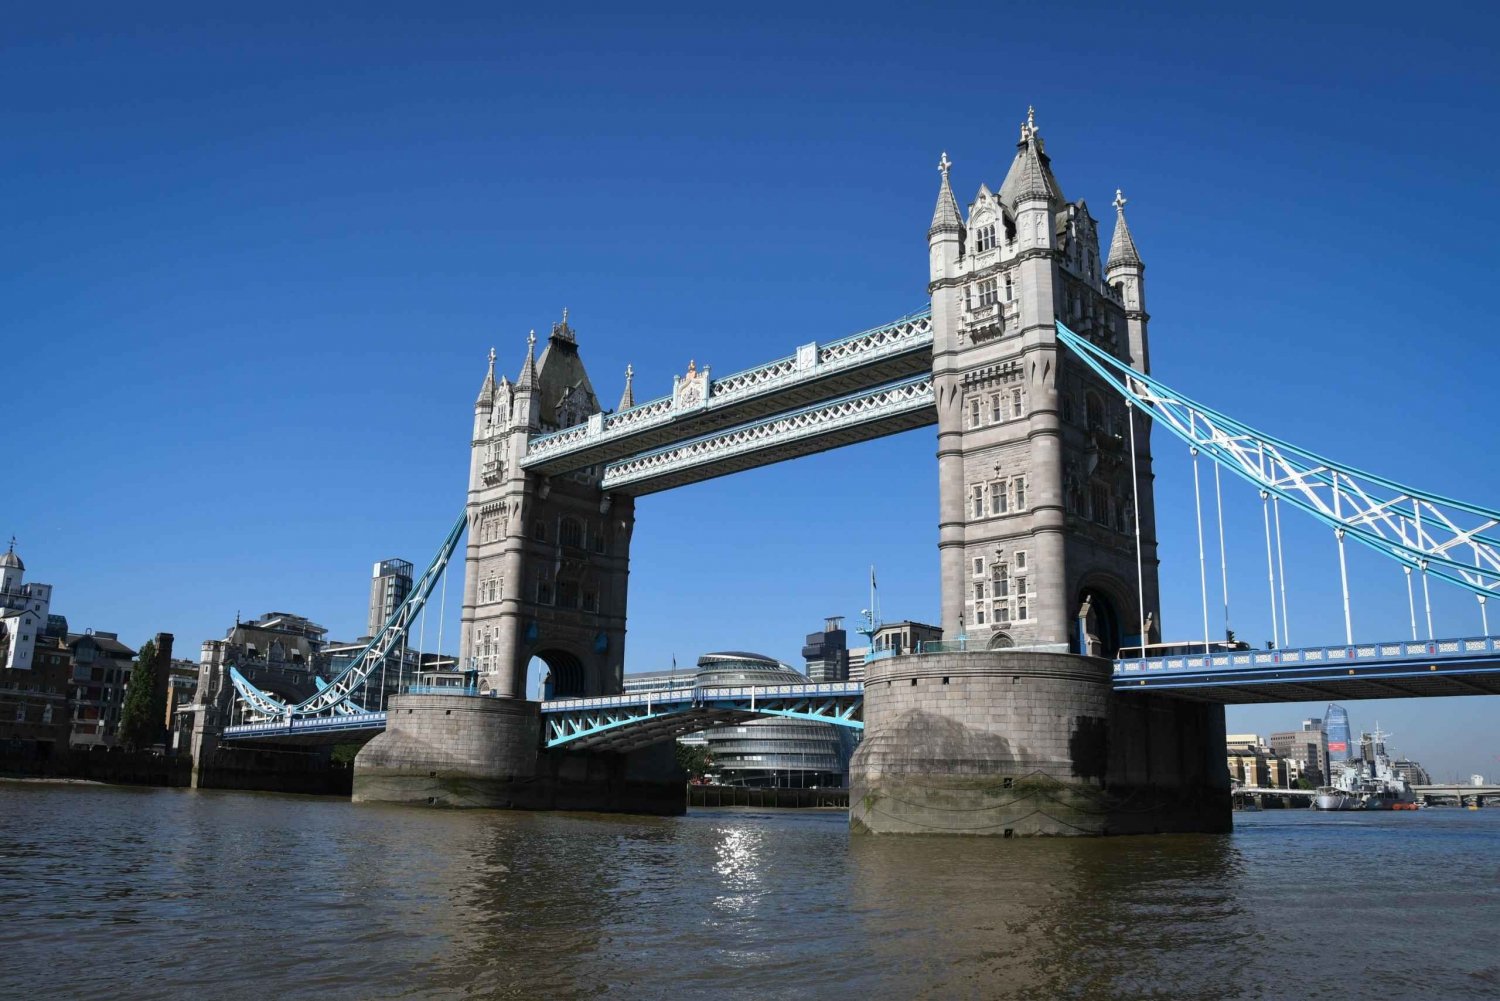 London: Westminster Tour and Tower of London & Tower Bridge!